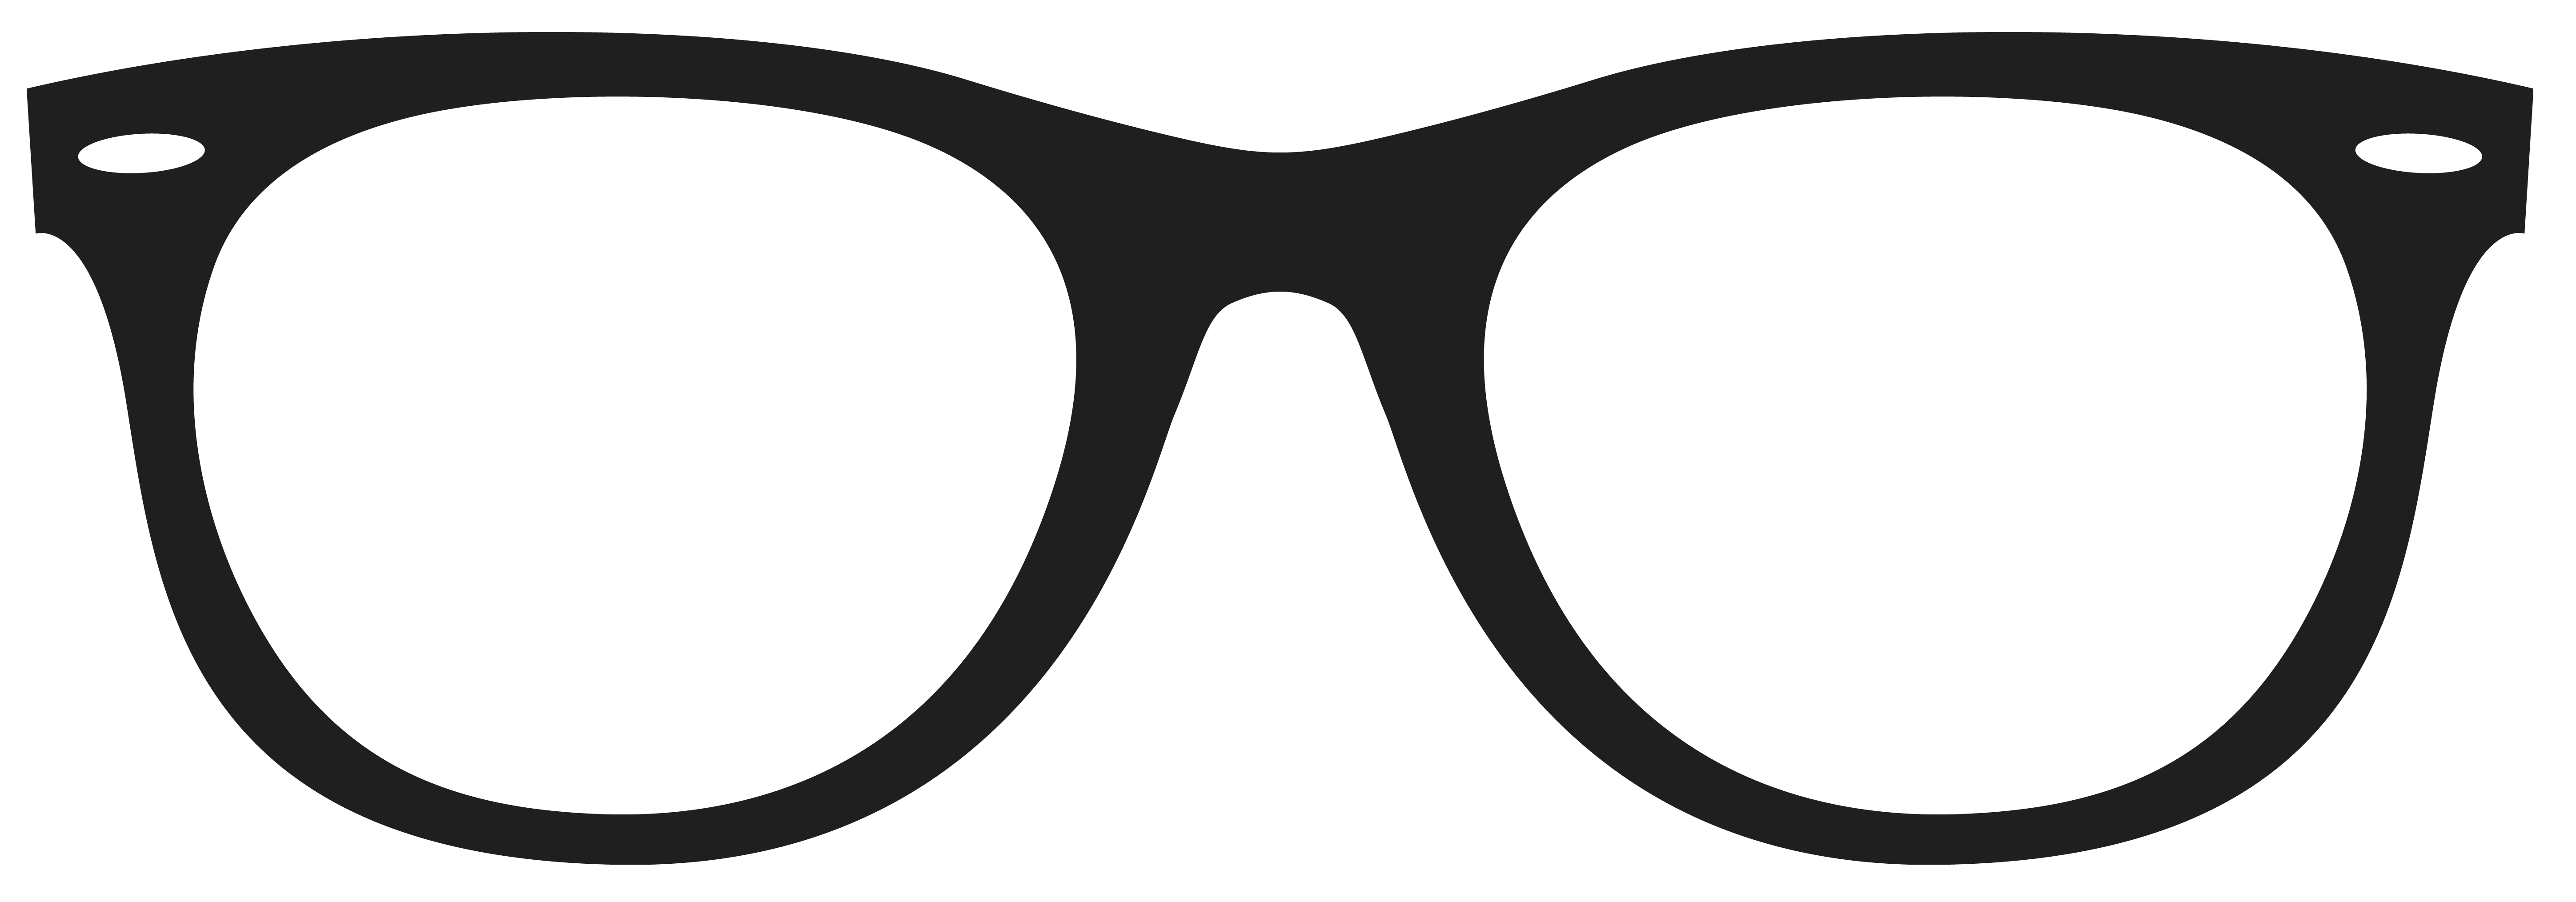 Ray Ban Glasses Clipart.